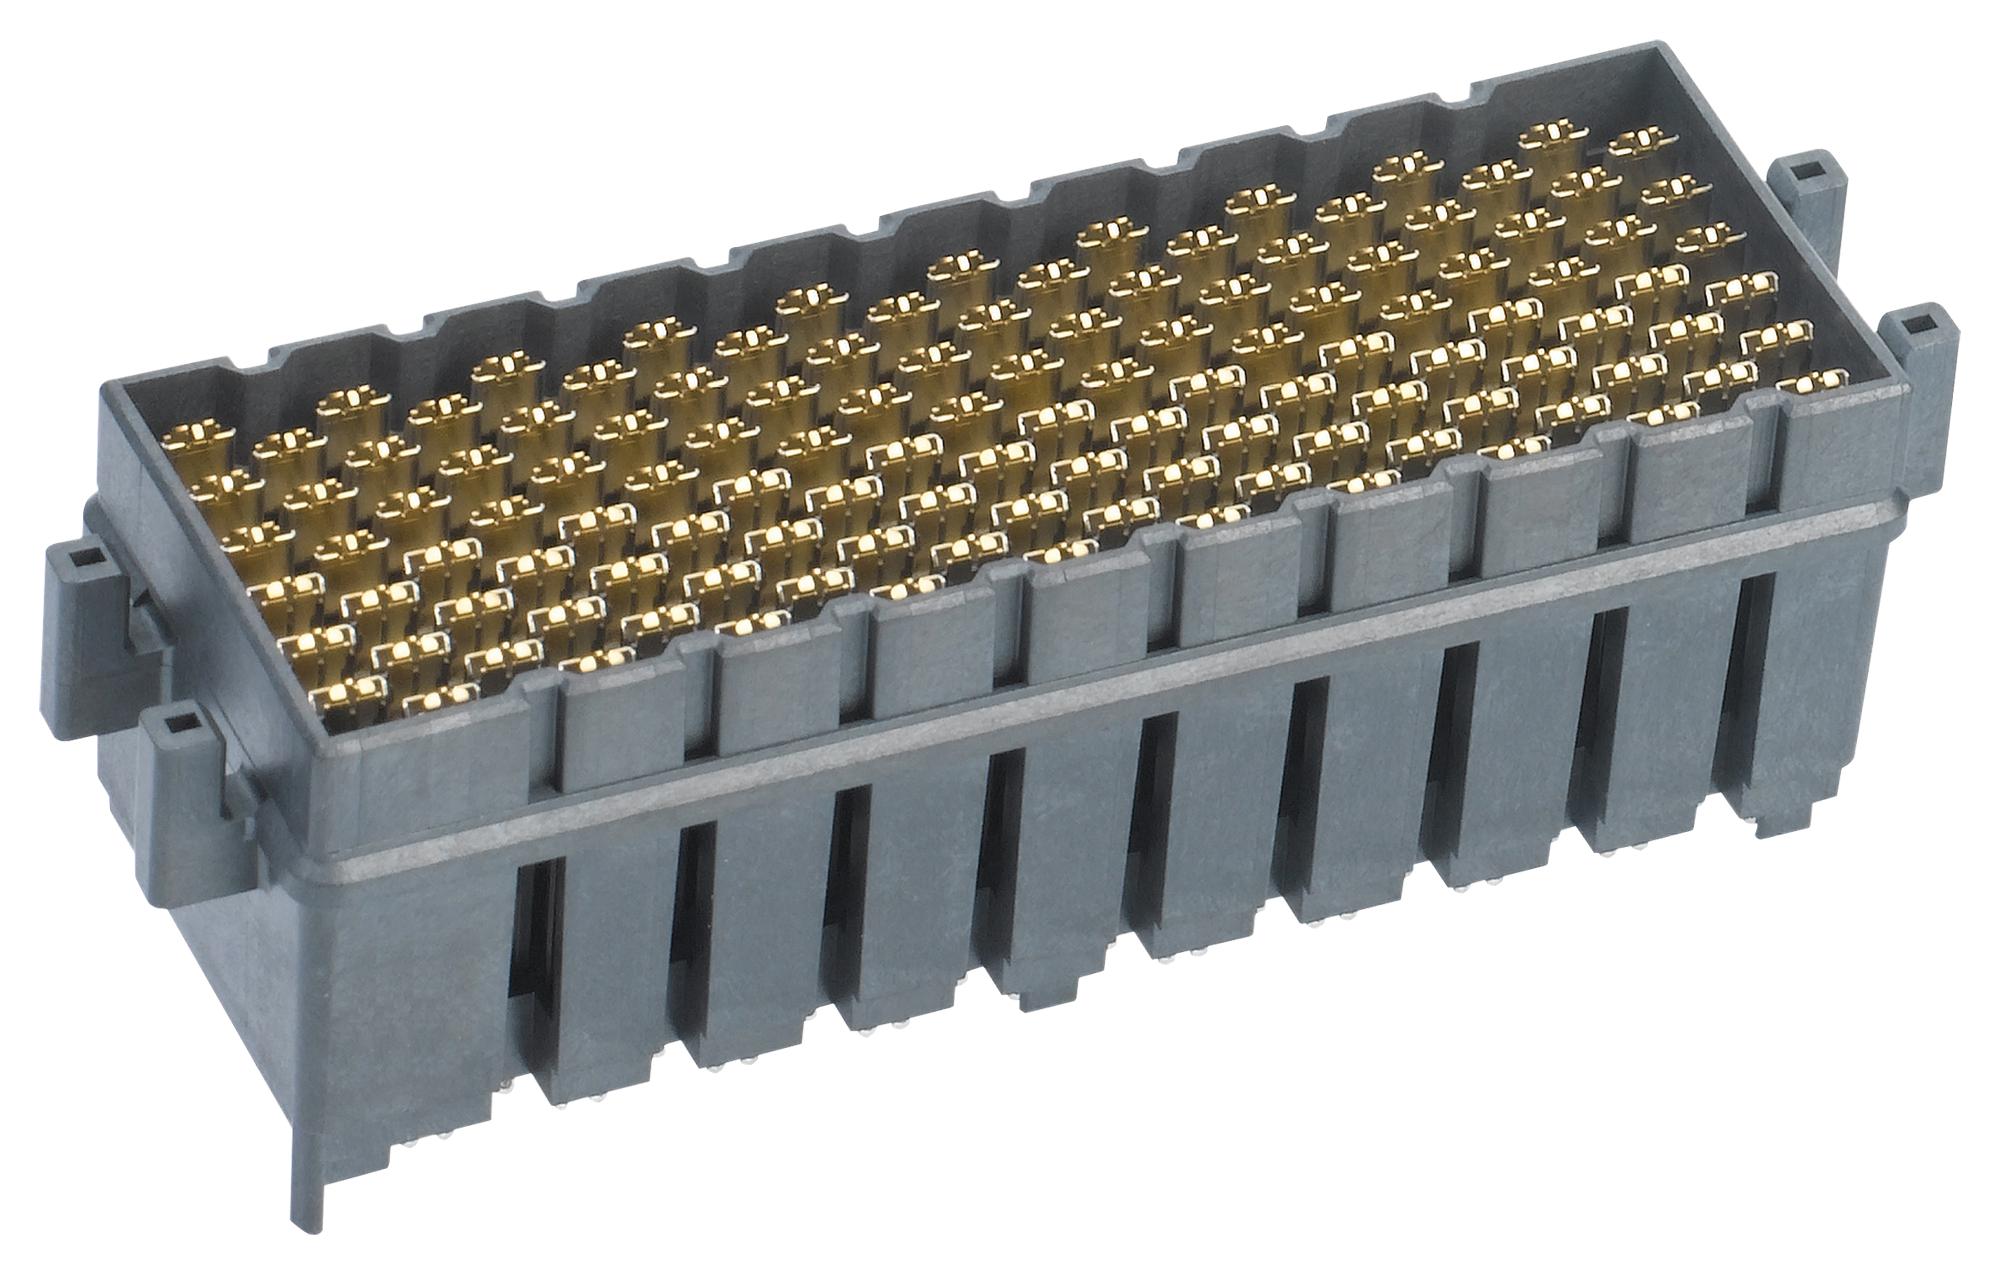 170807-2008 CONNECTOR, STACKING, HDR, 216POS, 6ROW MOLEX